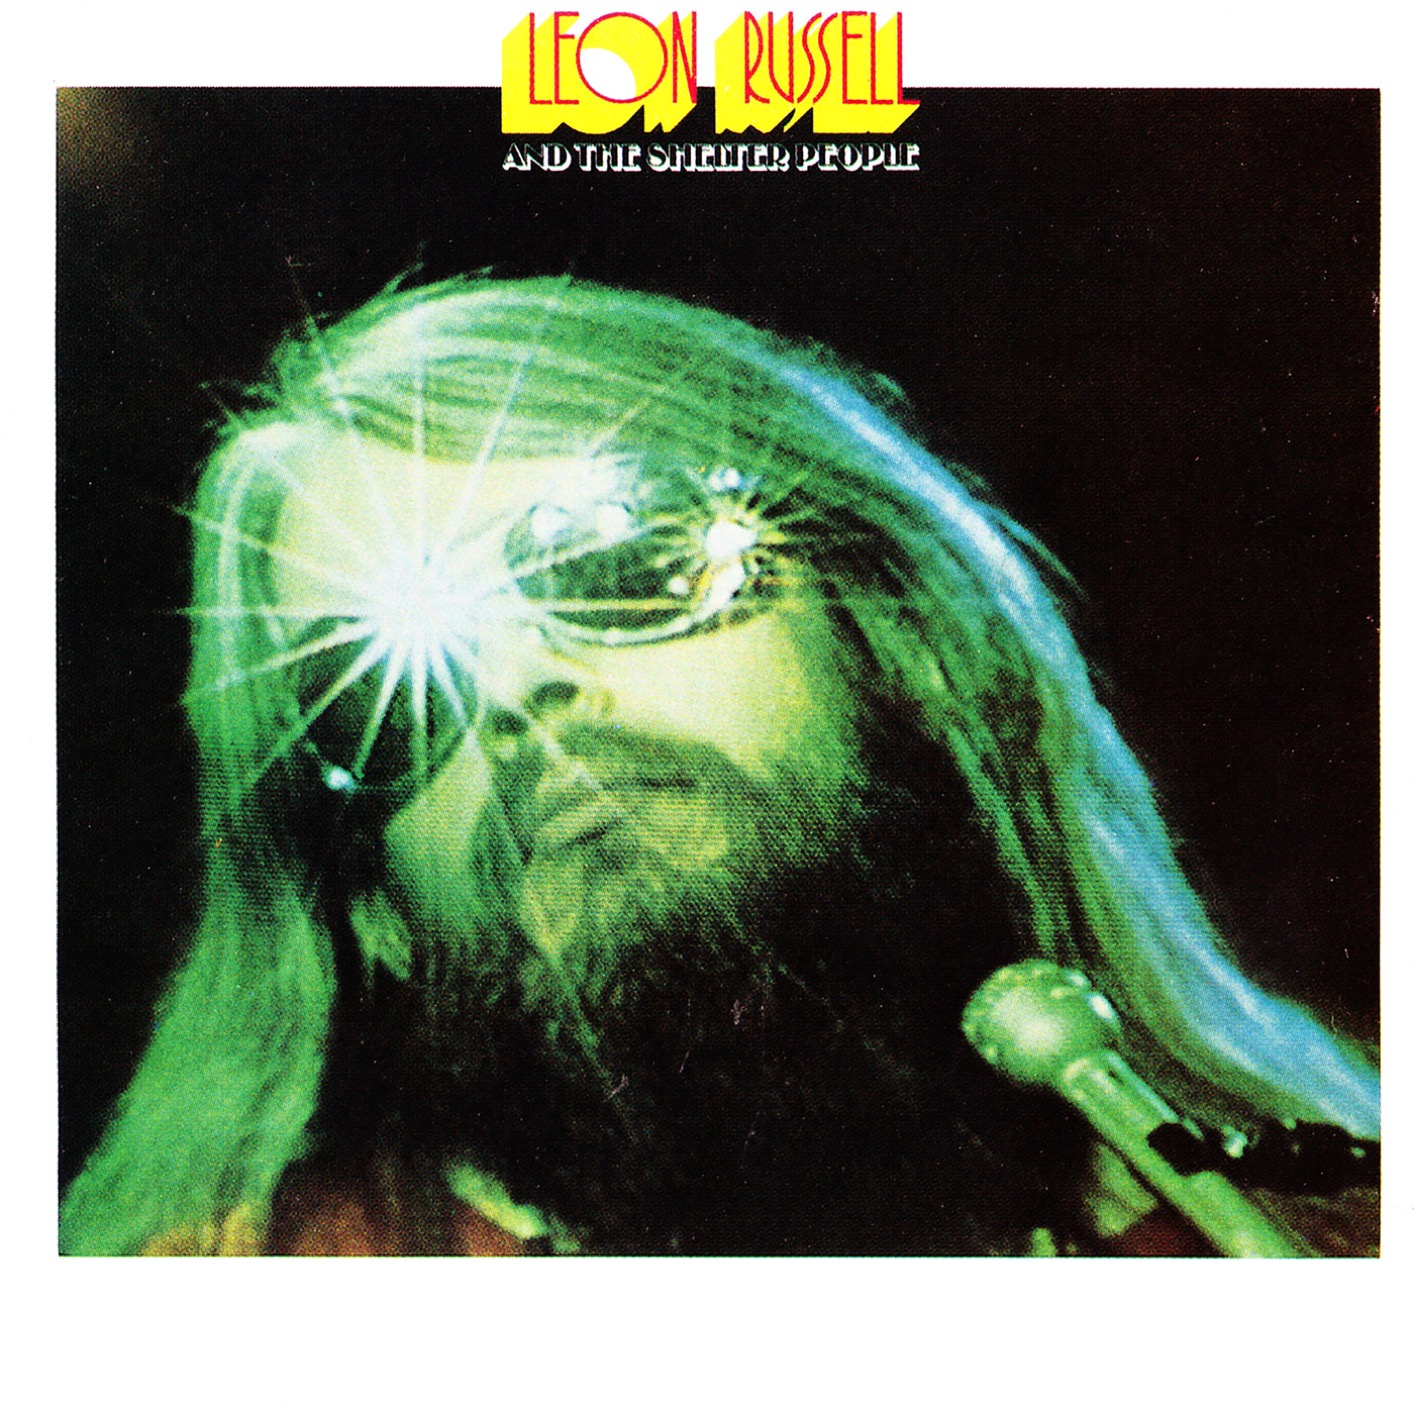 Leon Russell - Leon Russell And The Shelter People (1971/2013/2019) [FLAC 24bit/96kHz]